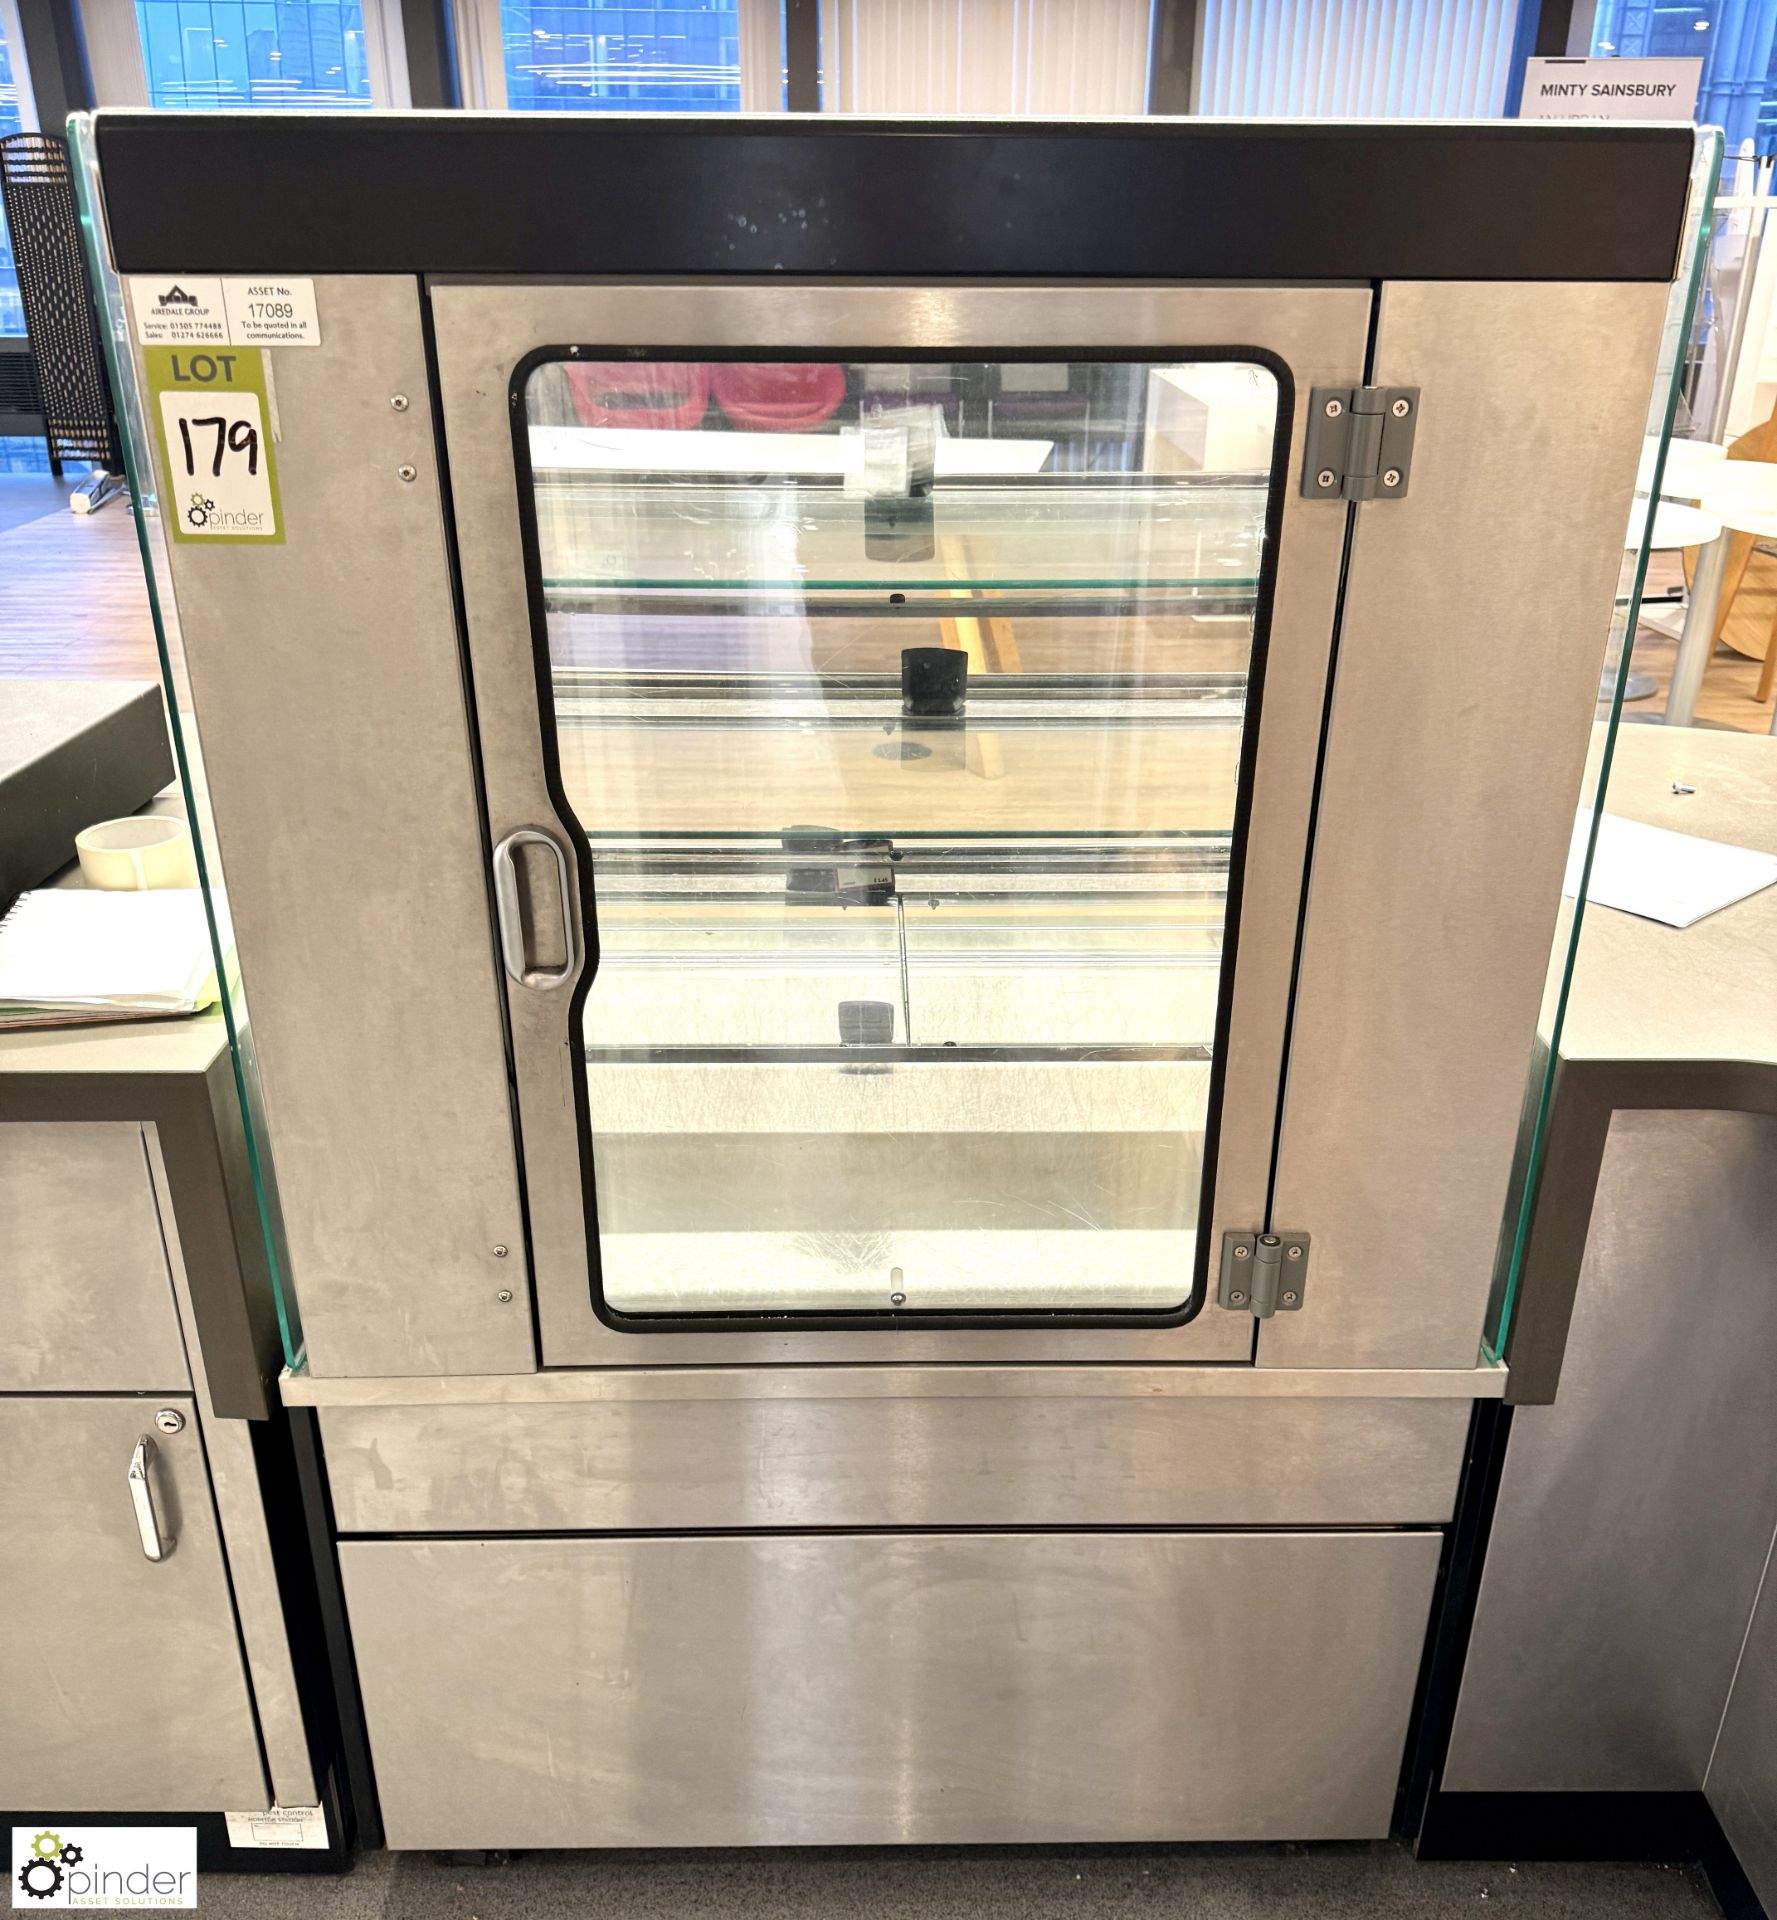 Stainless steel Chilled Display Unit, 240volts, 890mm x 760mm x 1410mm (location in building - level